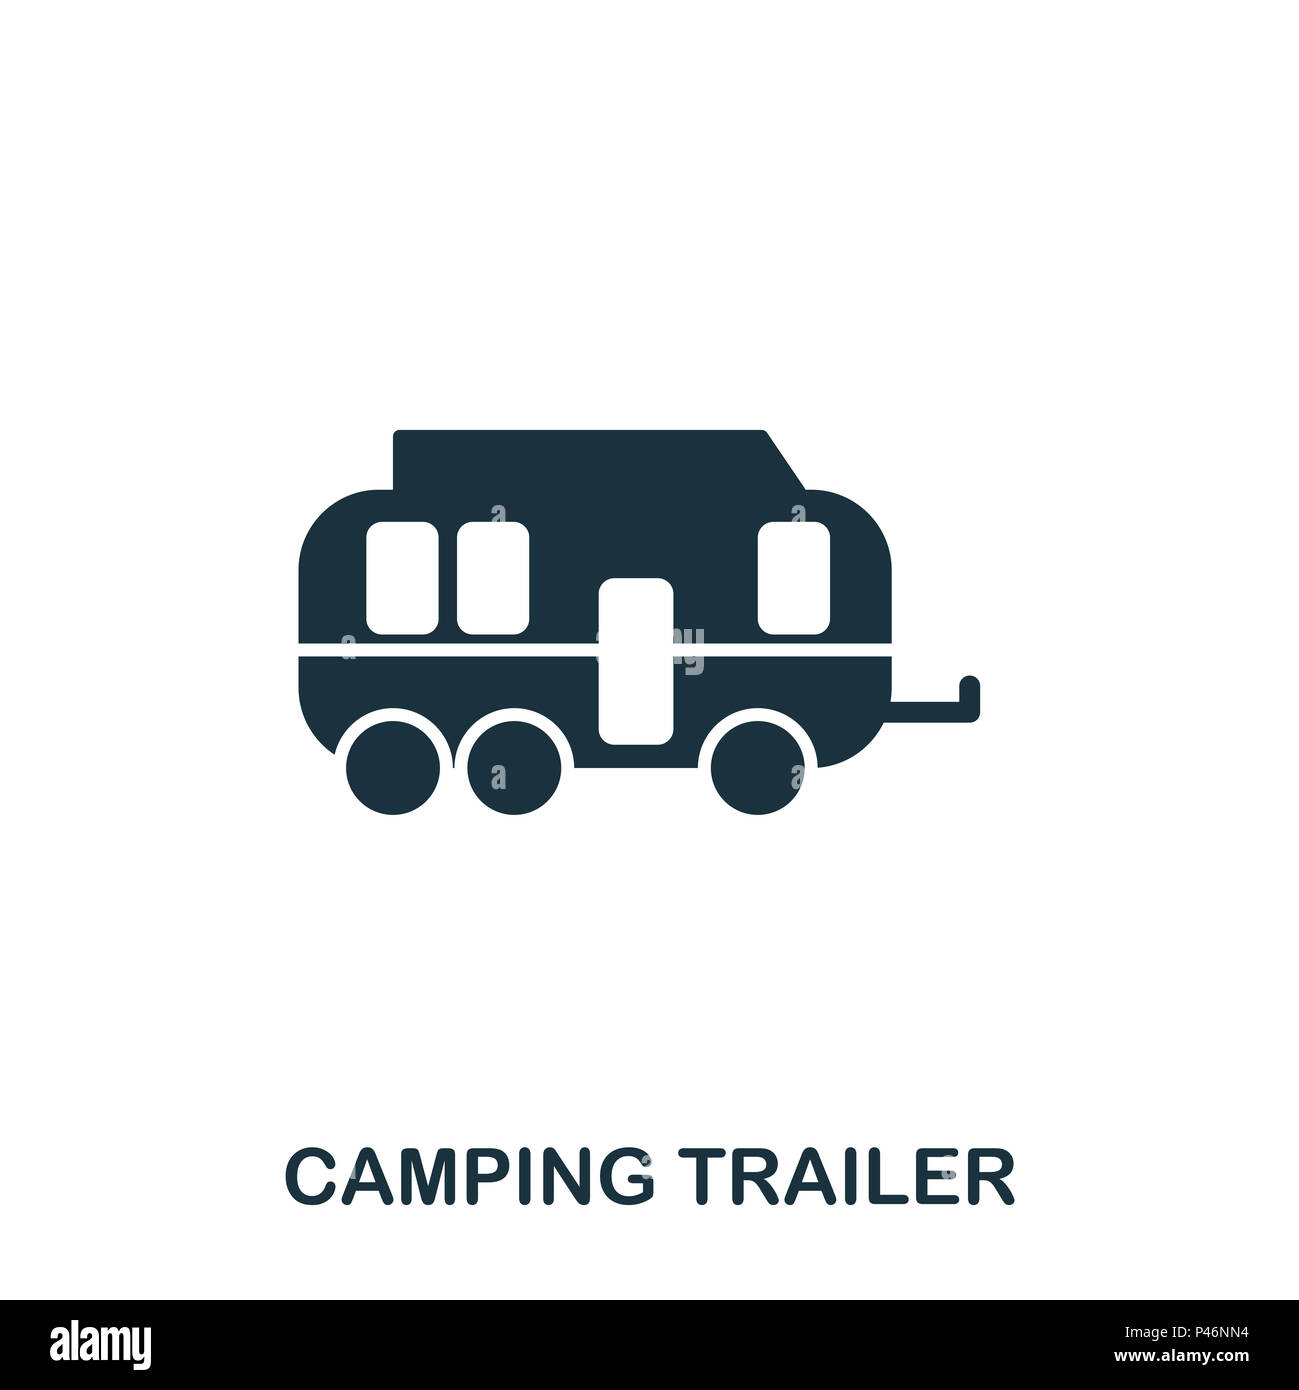 Camping Trailer icon. Mobile app, printing, web site icon. Simple element sing. Monochrome Camping Trailer icon illustration. Stock Photo